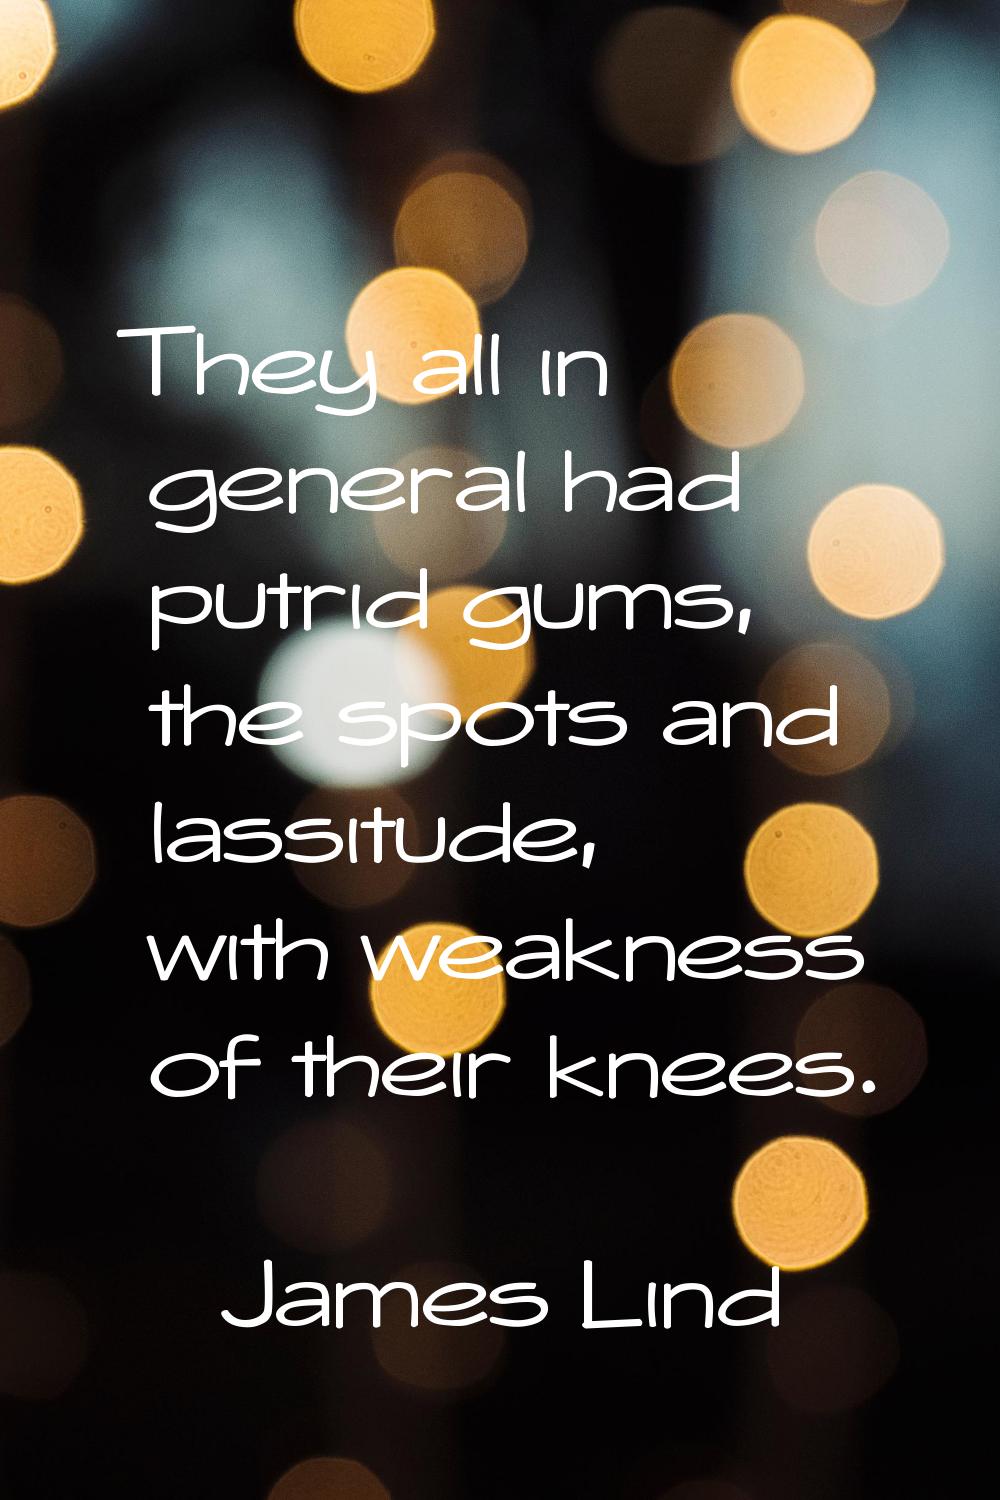 They all in general had putrid gums, the spots and lassitude, with weakness of their knees.